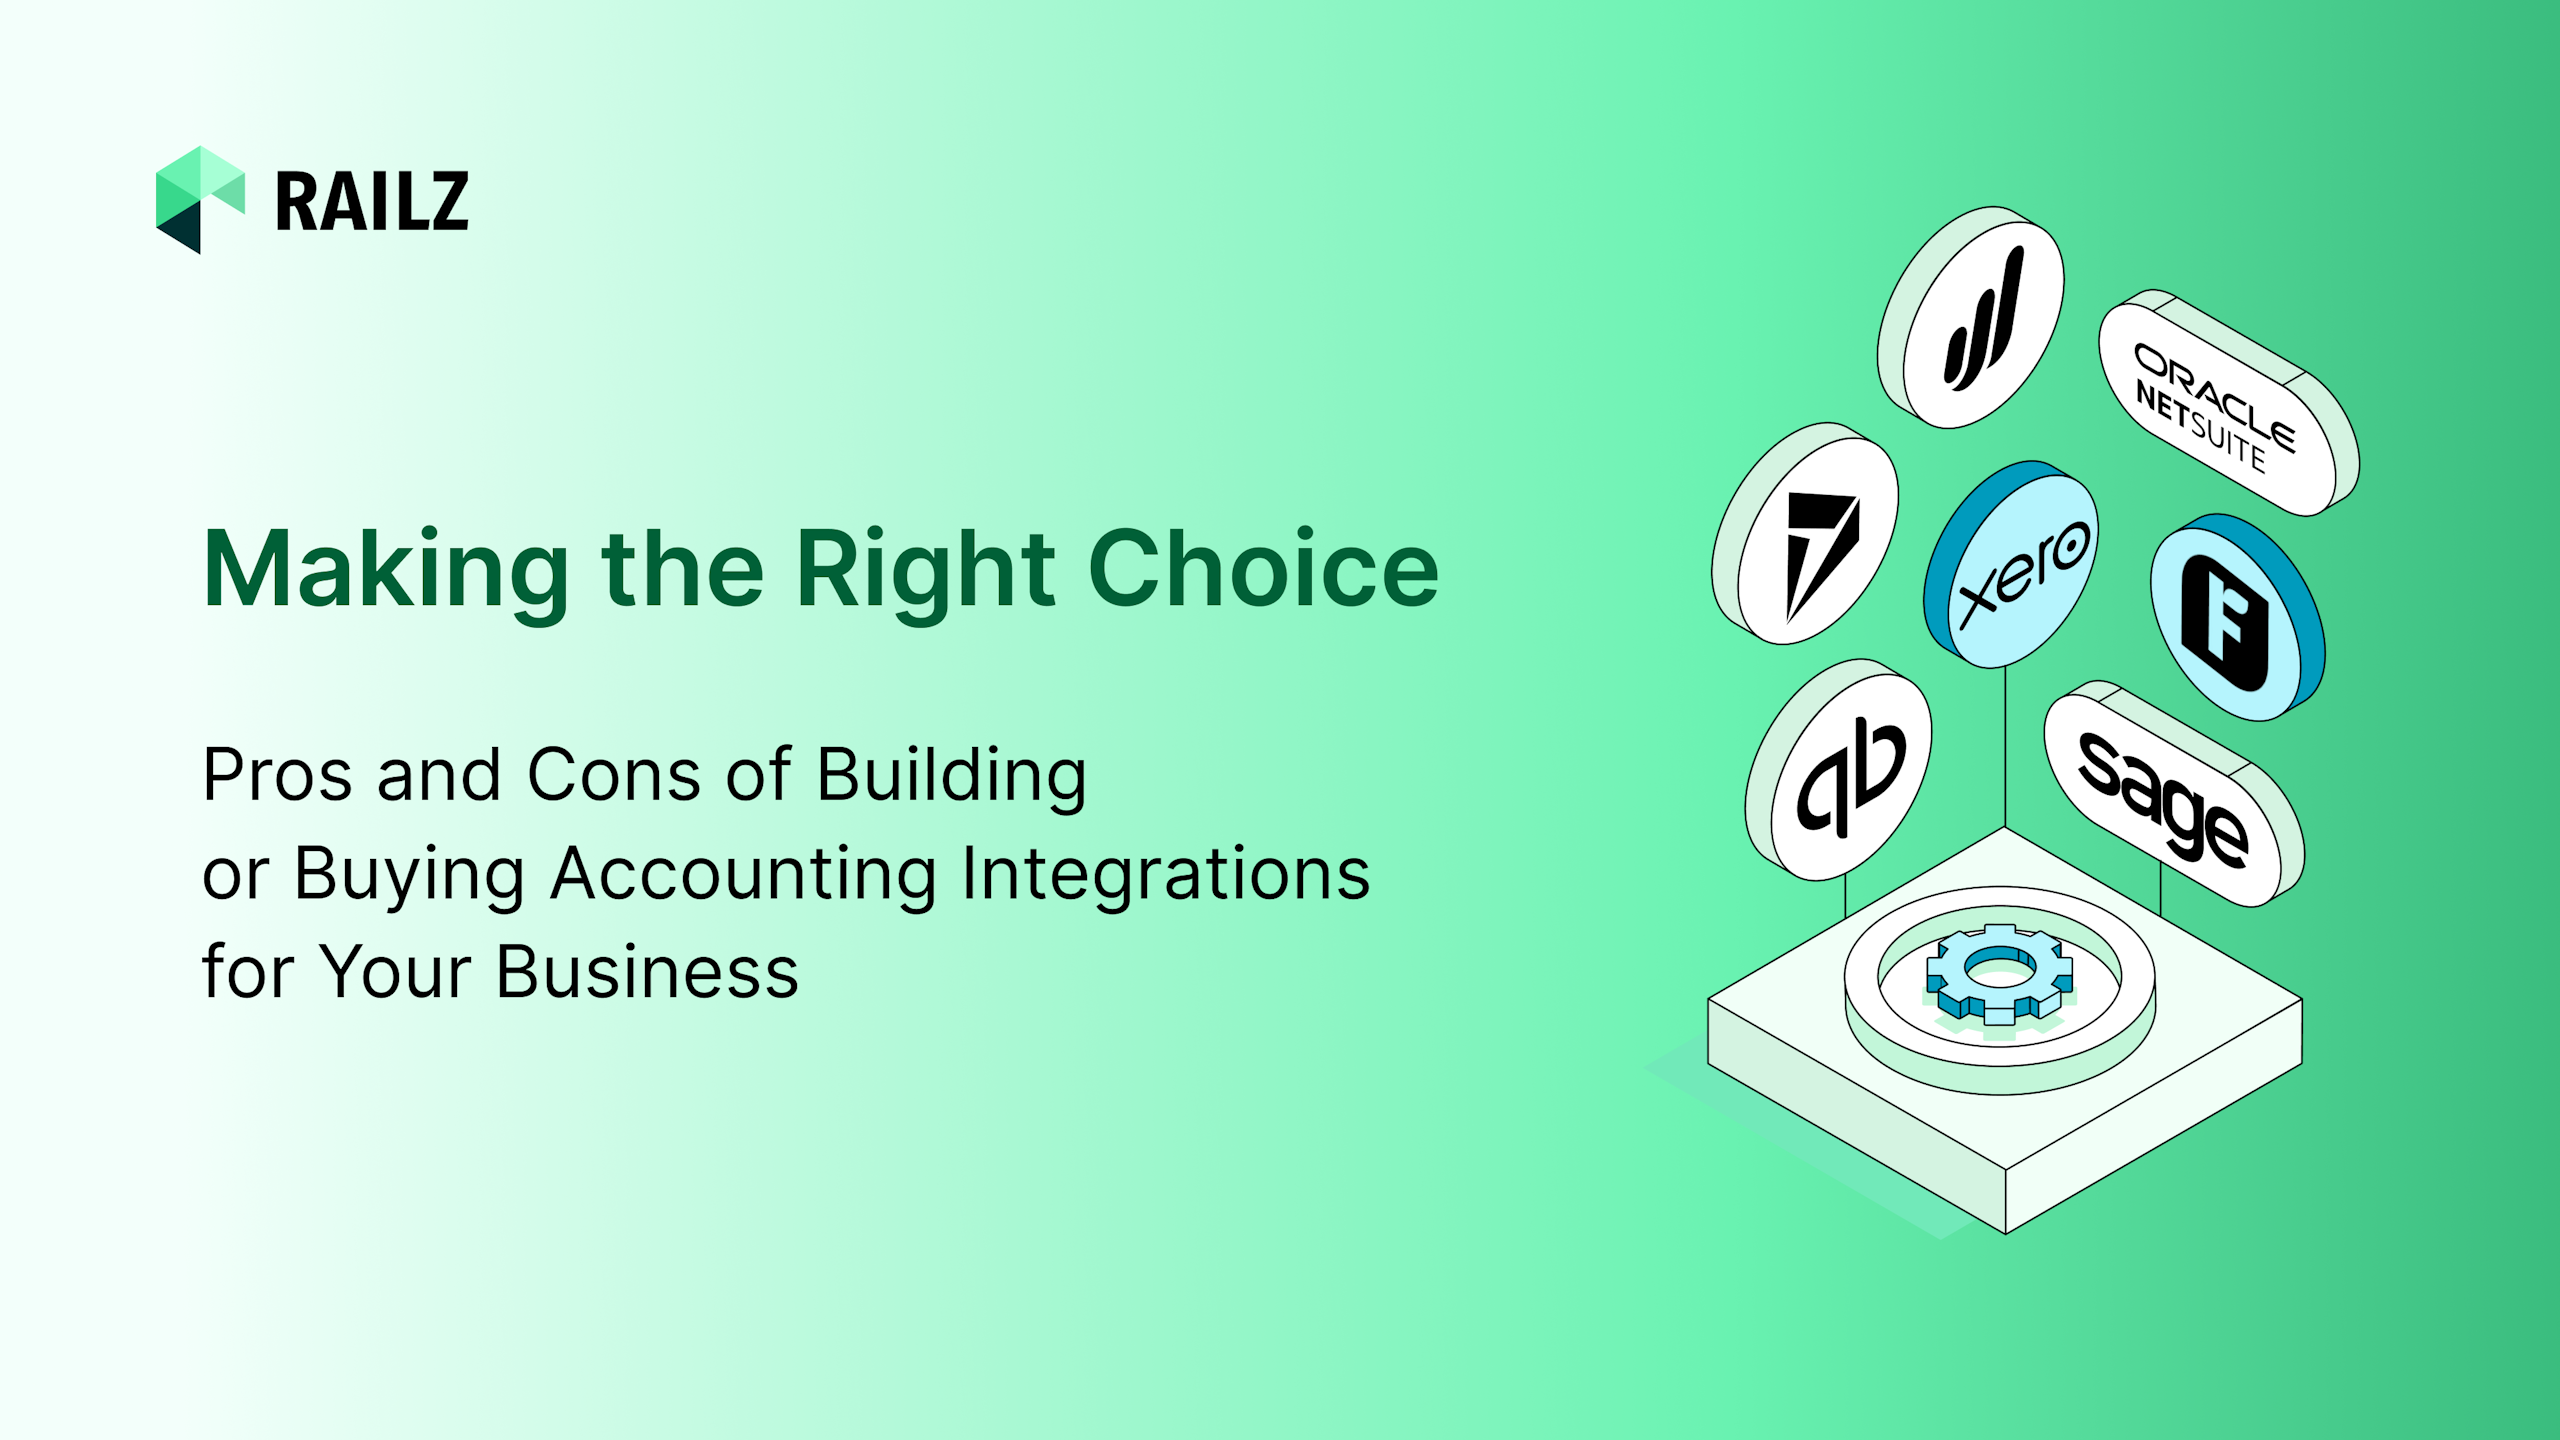 Pros and Cons of Building or Buying Accounting Integrations for Your Business